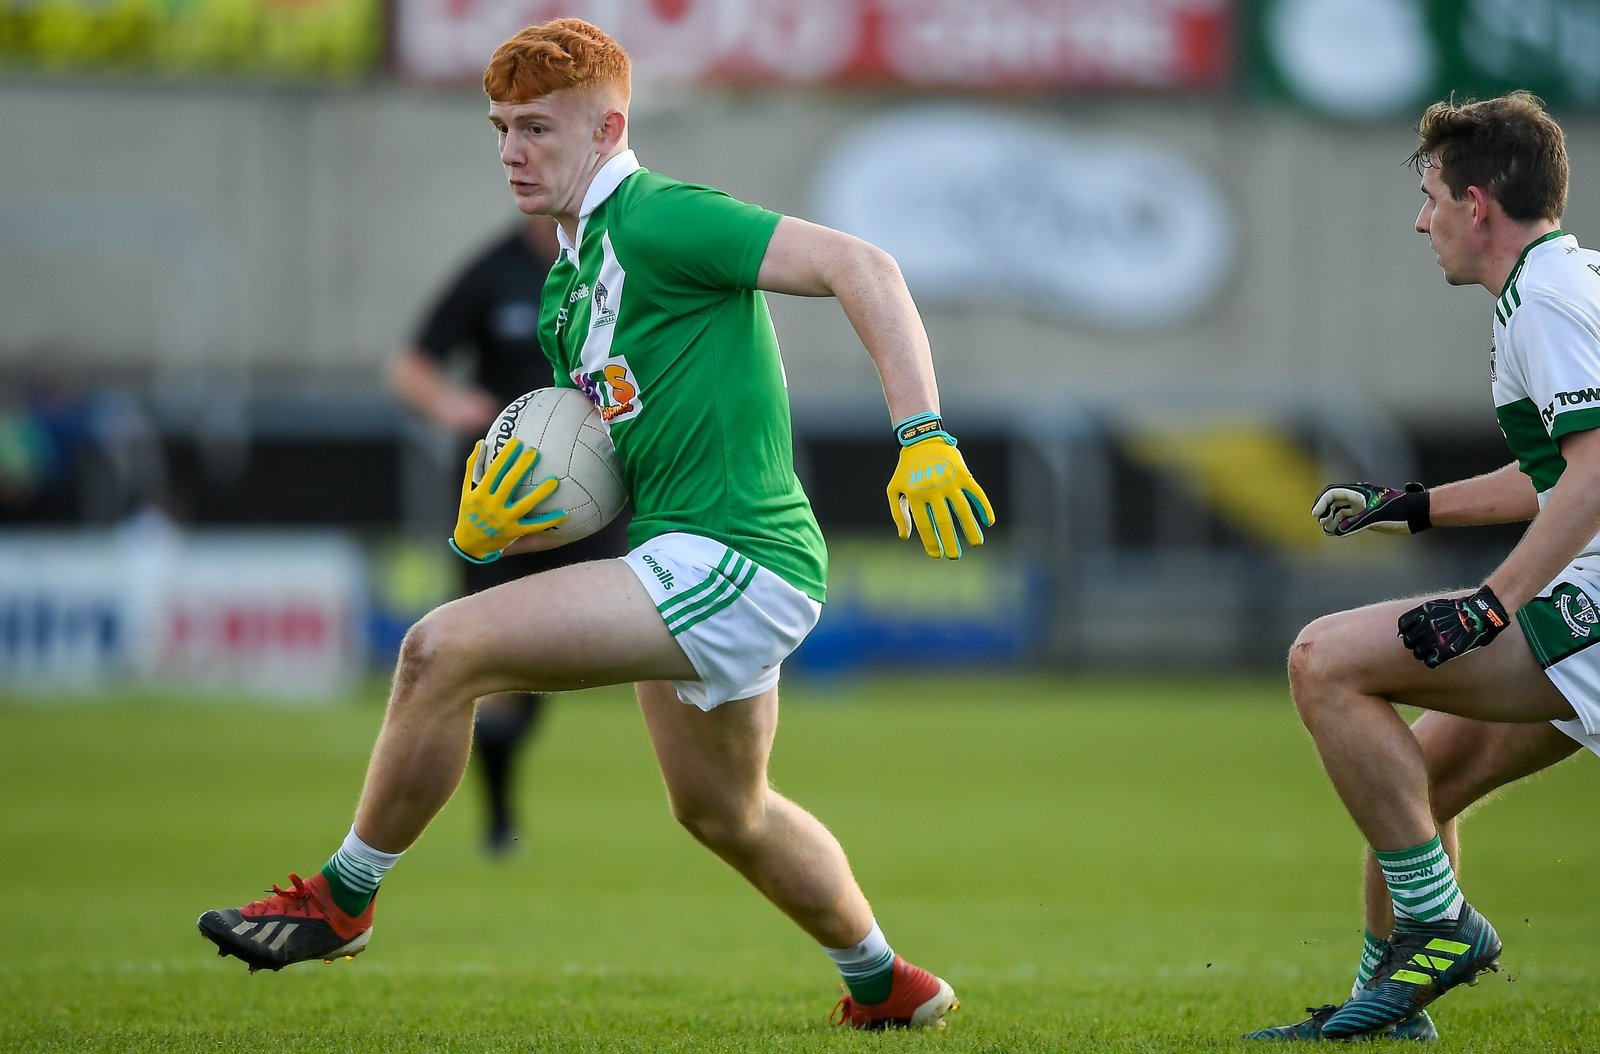 Image - Ross Bolger in action for Killeshin against Portlaoise during the Laois County Senior Club Football Championship Final in 2019